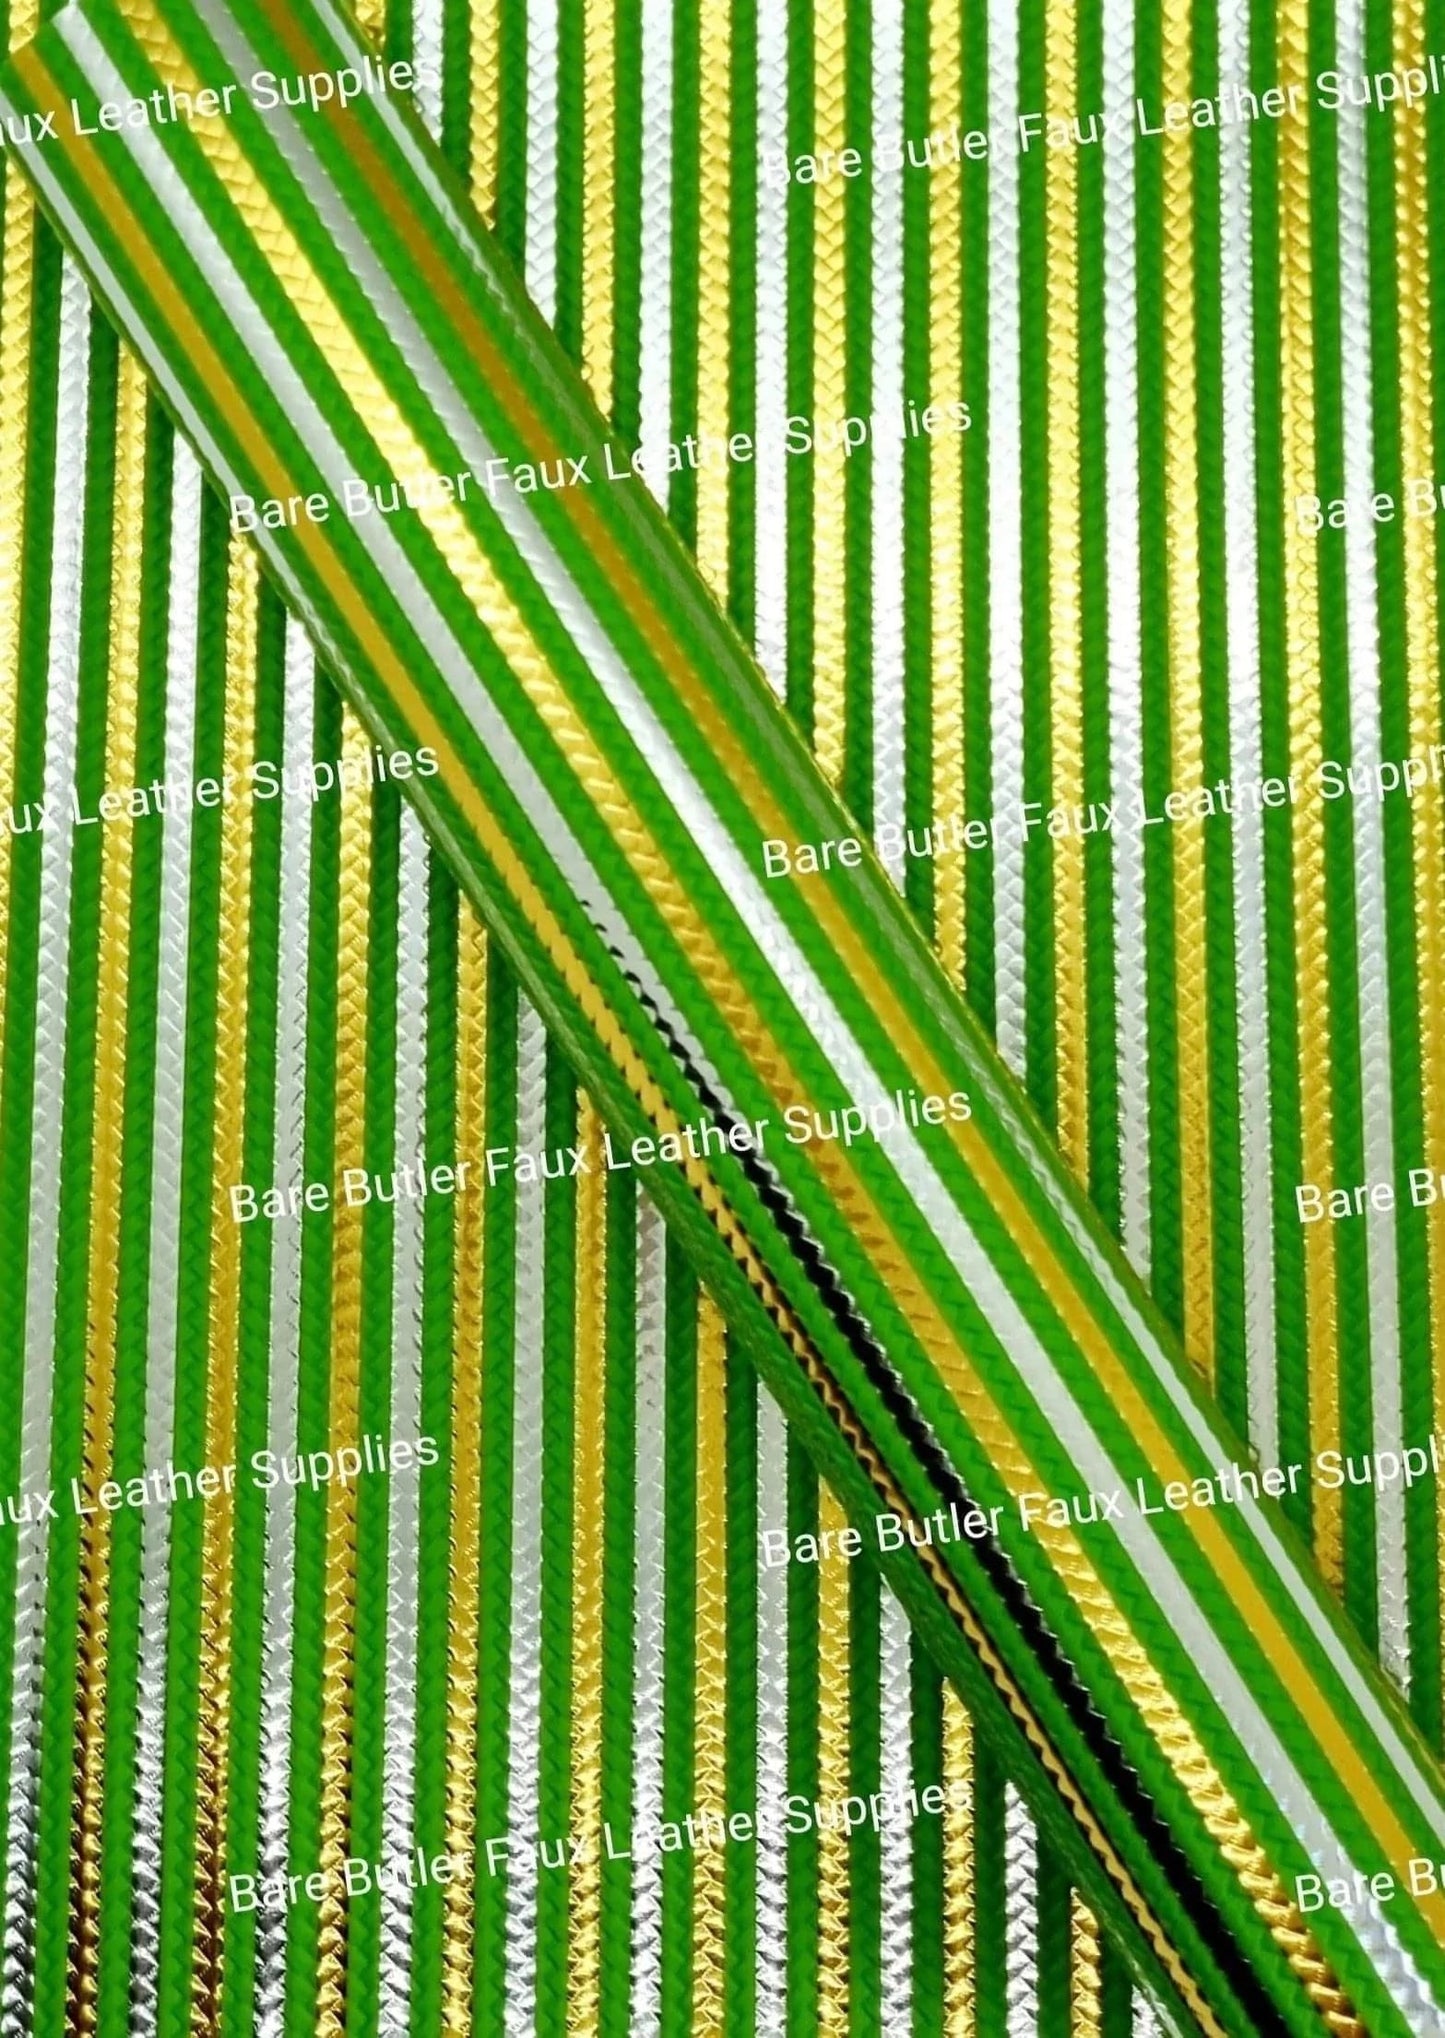 Metallic Embossed Weave Green, Silver and Gold - Faux, Faux Leather, Floral, Glitter, rainbow - Bare Butler Faux Leather Supplies 